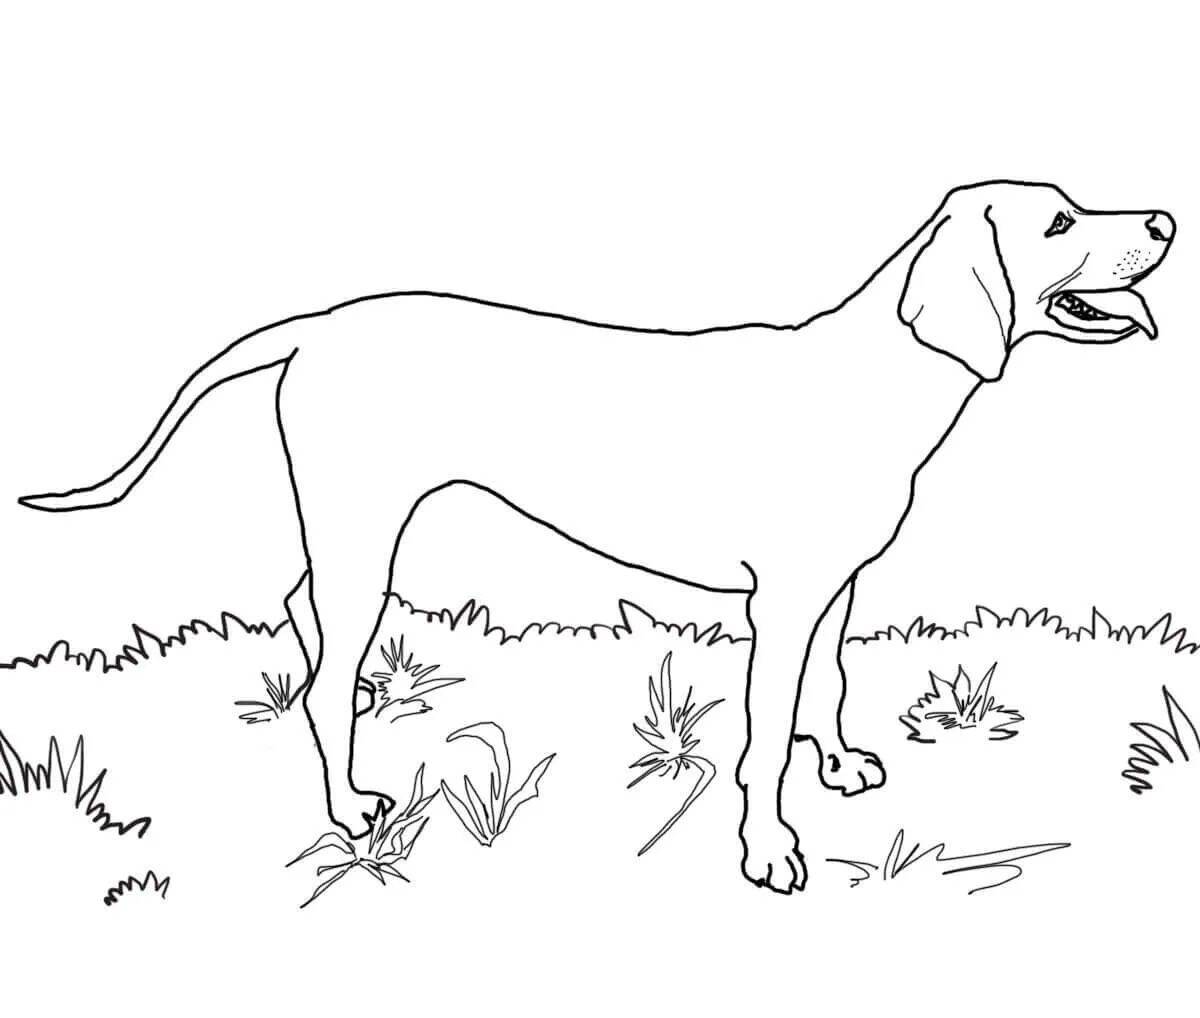 Color-explosion spiral dog coloring page